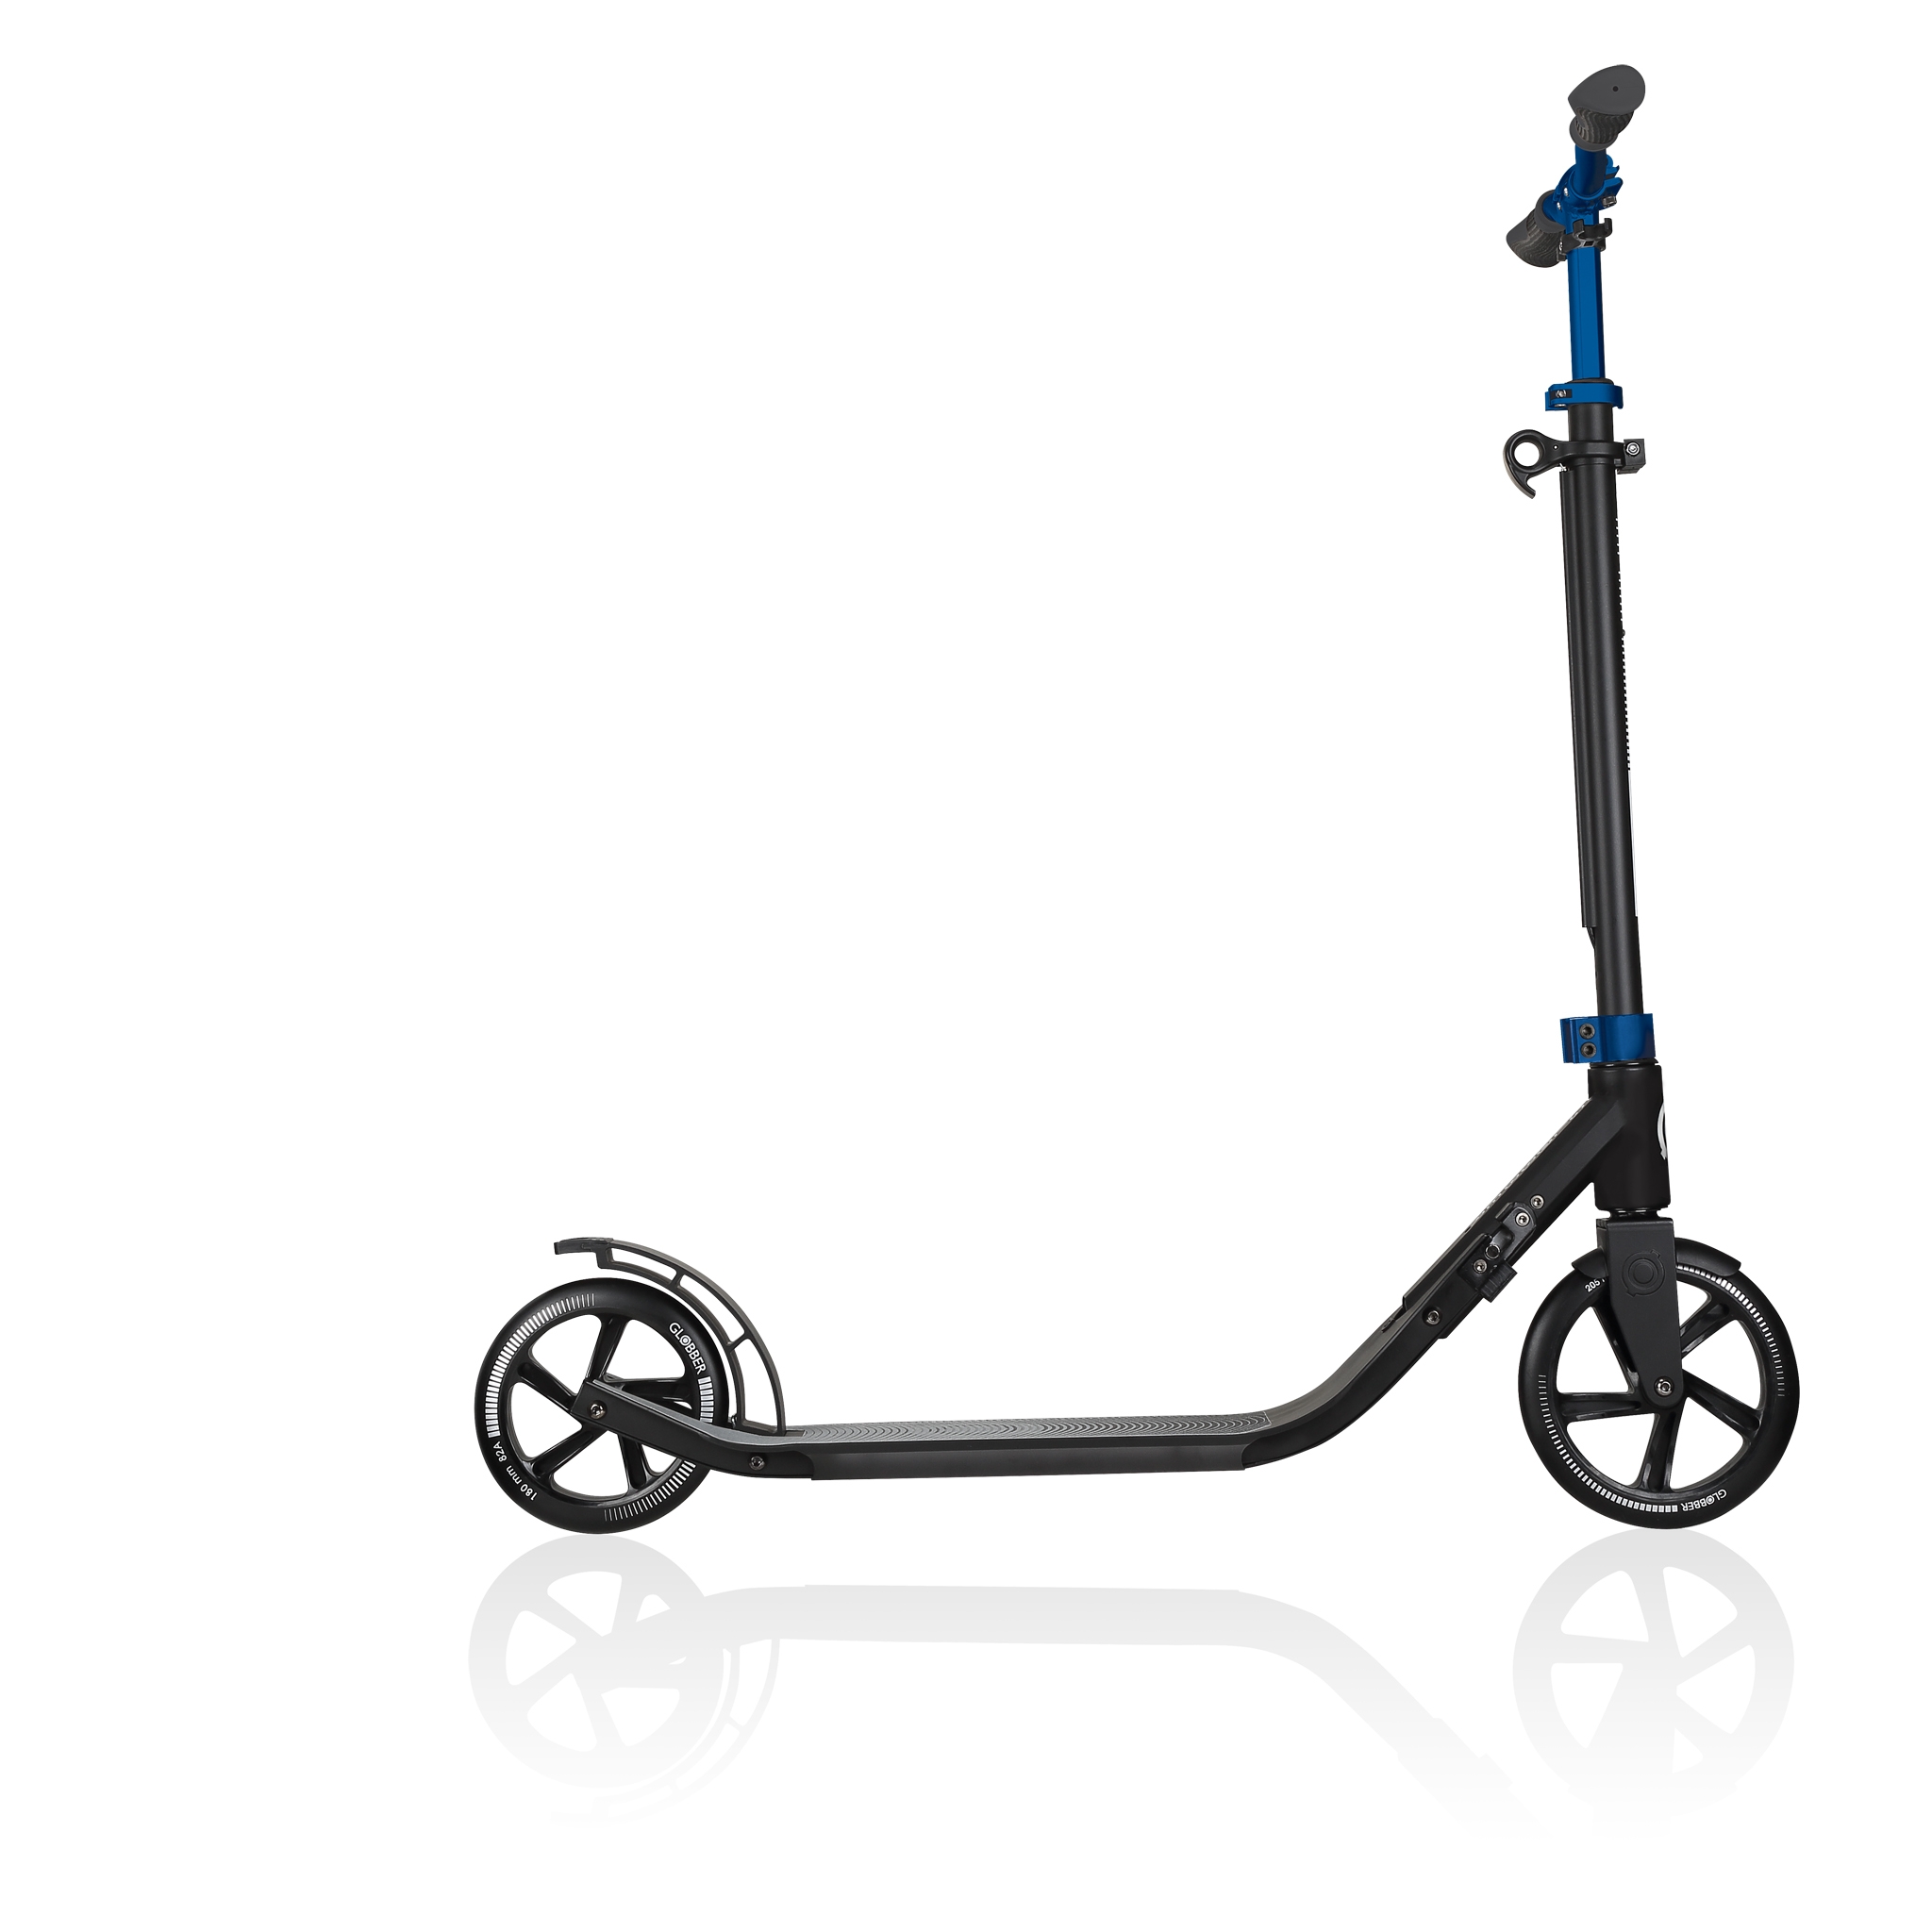 Globber-ONE-NL-205-180-DUO-2-wheel-foldable-scooter-for-adults-aluminium-deck-cobalt-blue 3